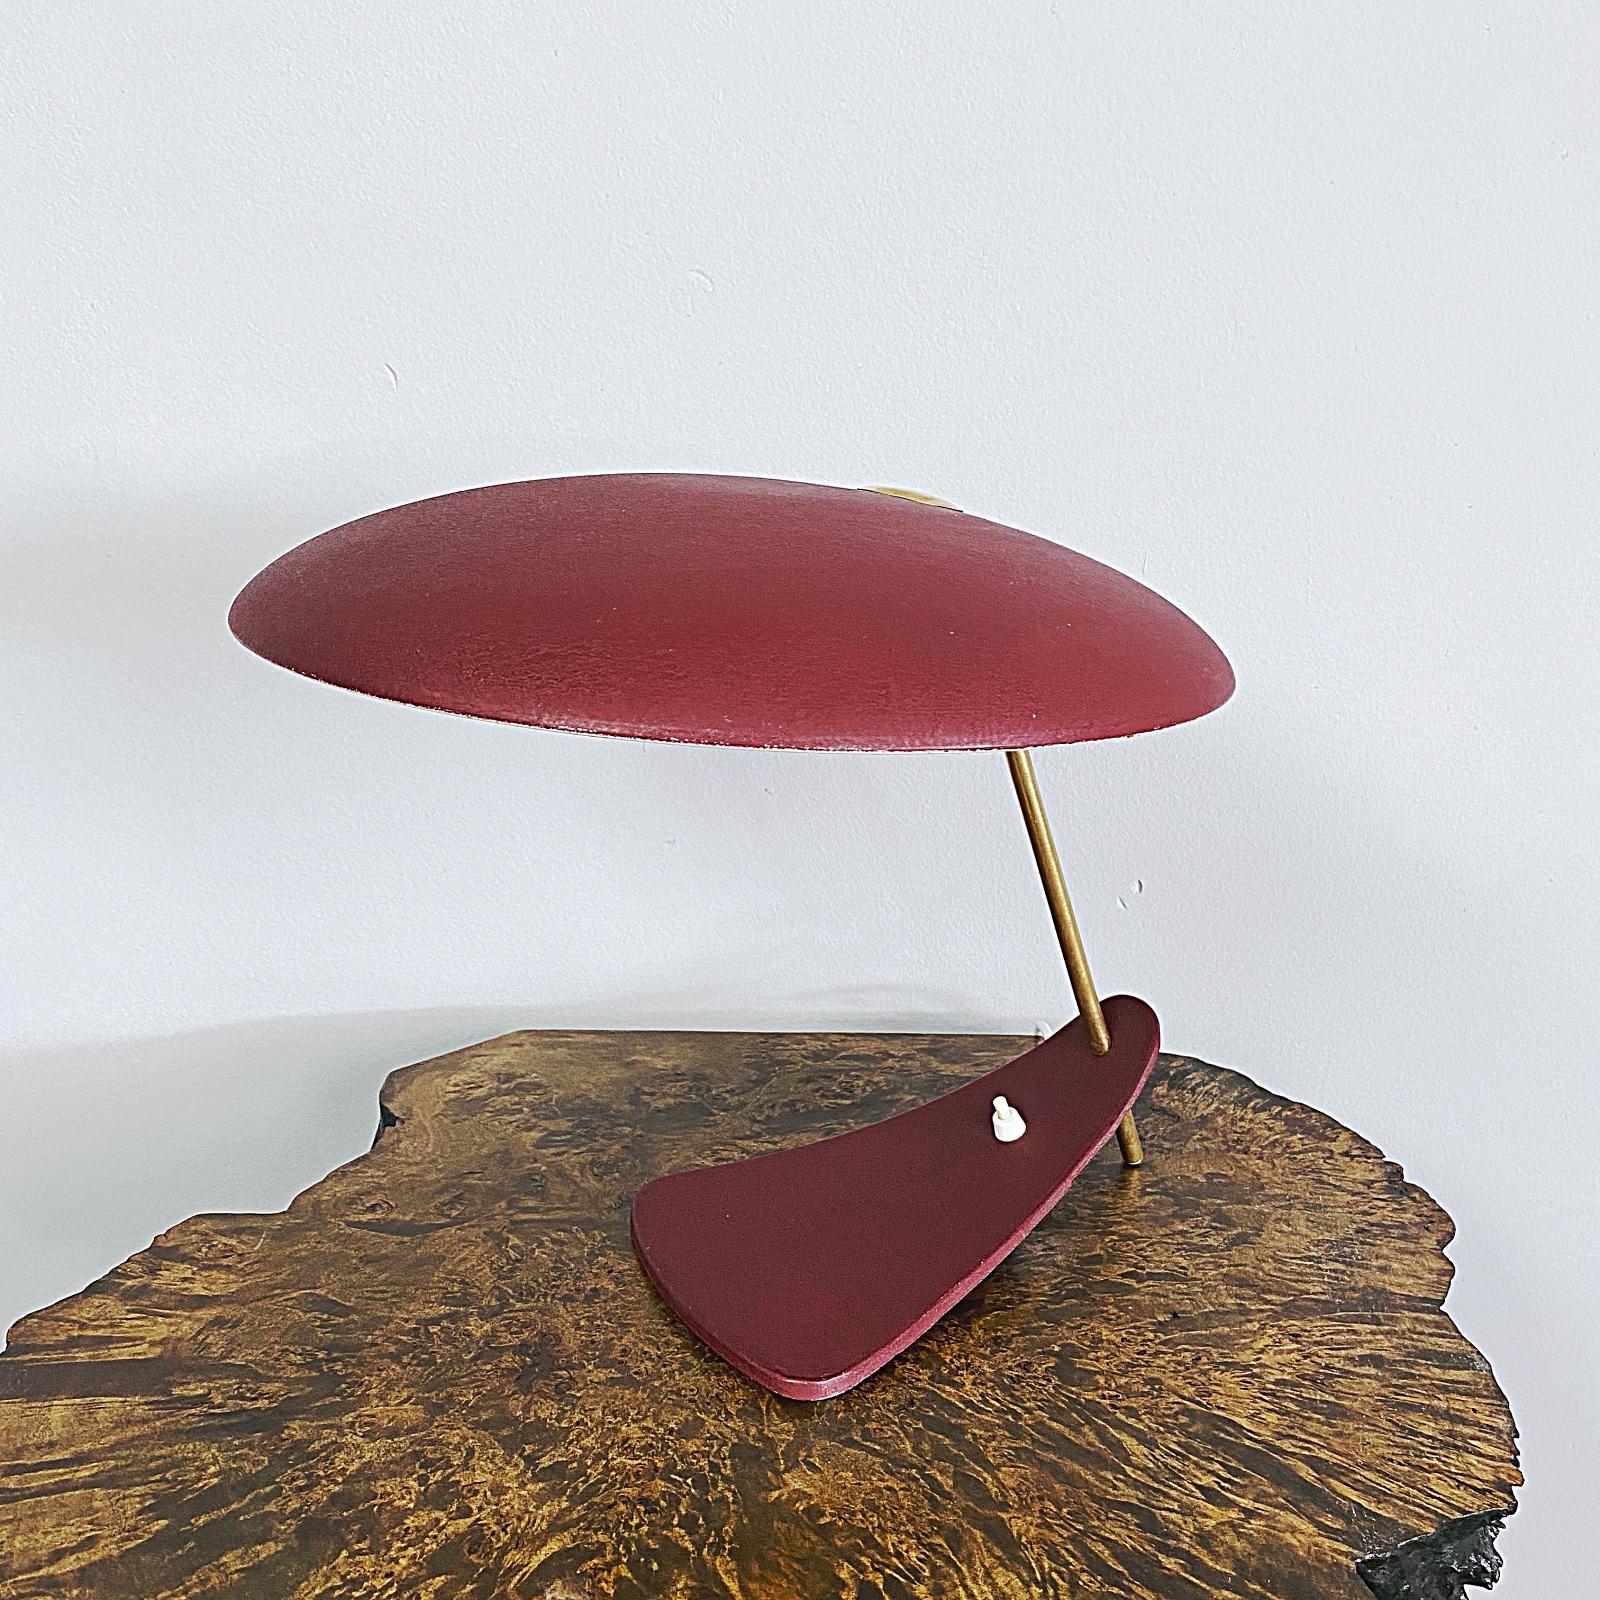 Iconic midcentury desk lamp in Bordeaux red wrinkle paint with brass details. Minimalistic design from the 1950s - big round shade with cast iron beak-shaped base. The shade provides a smooth large-area light. Nice patina without bumps or dents.